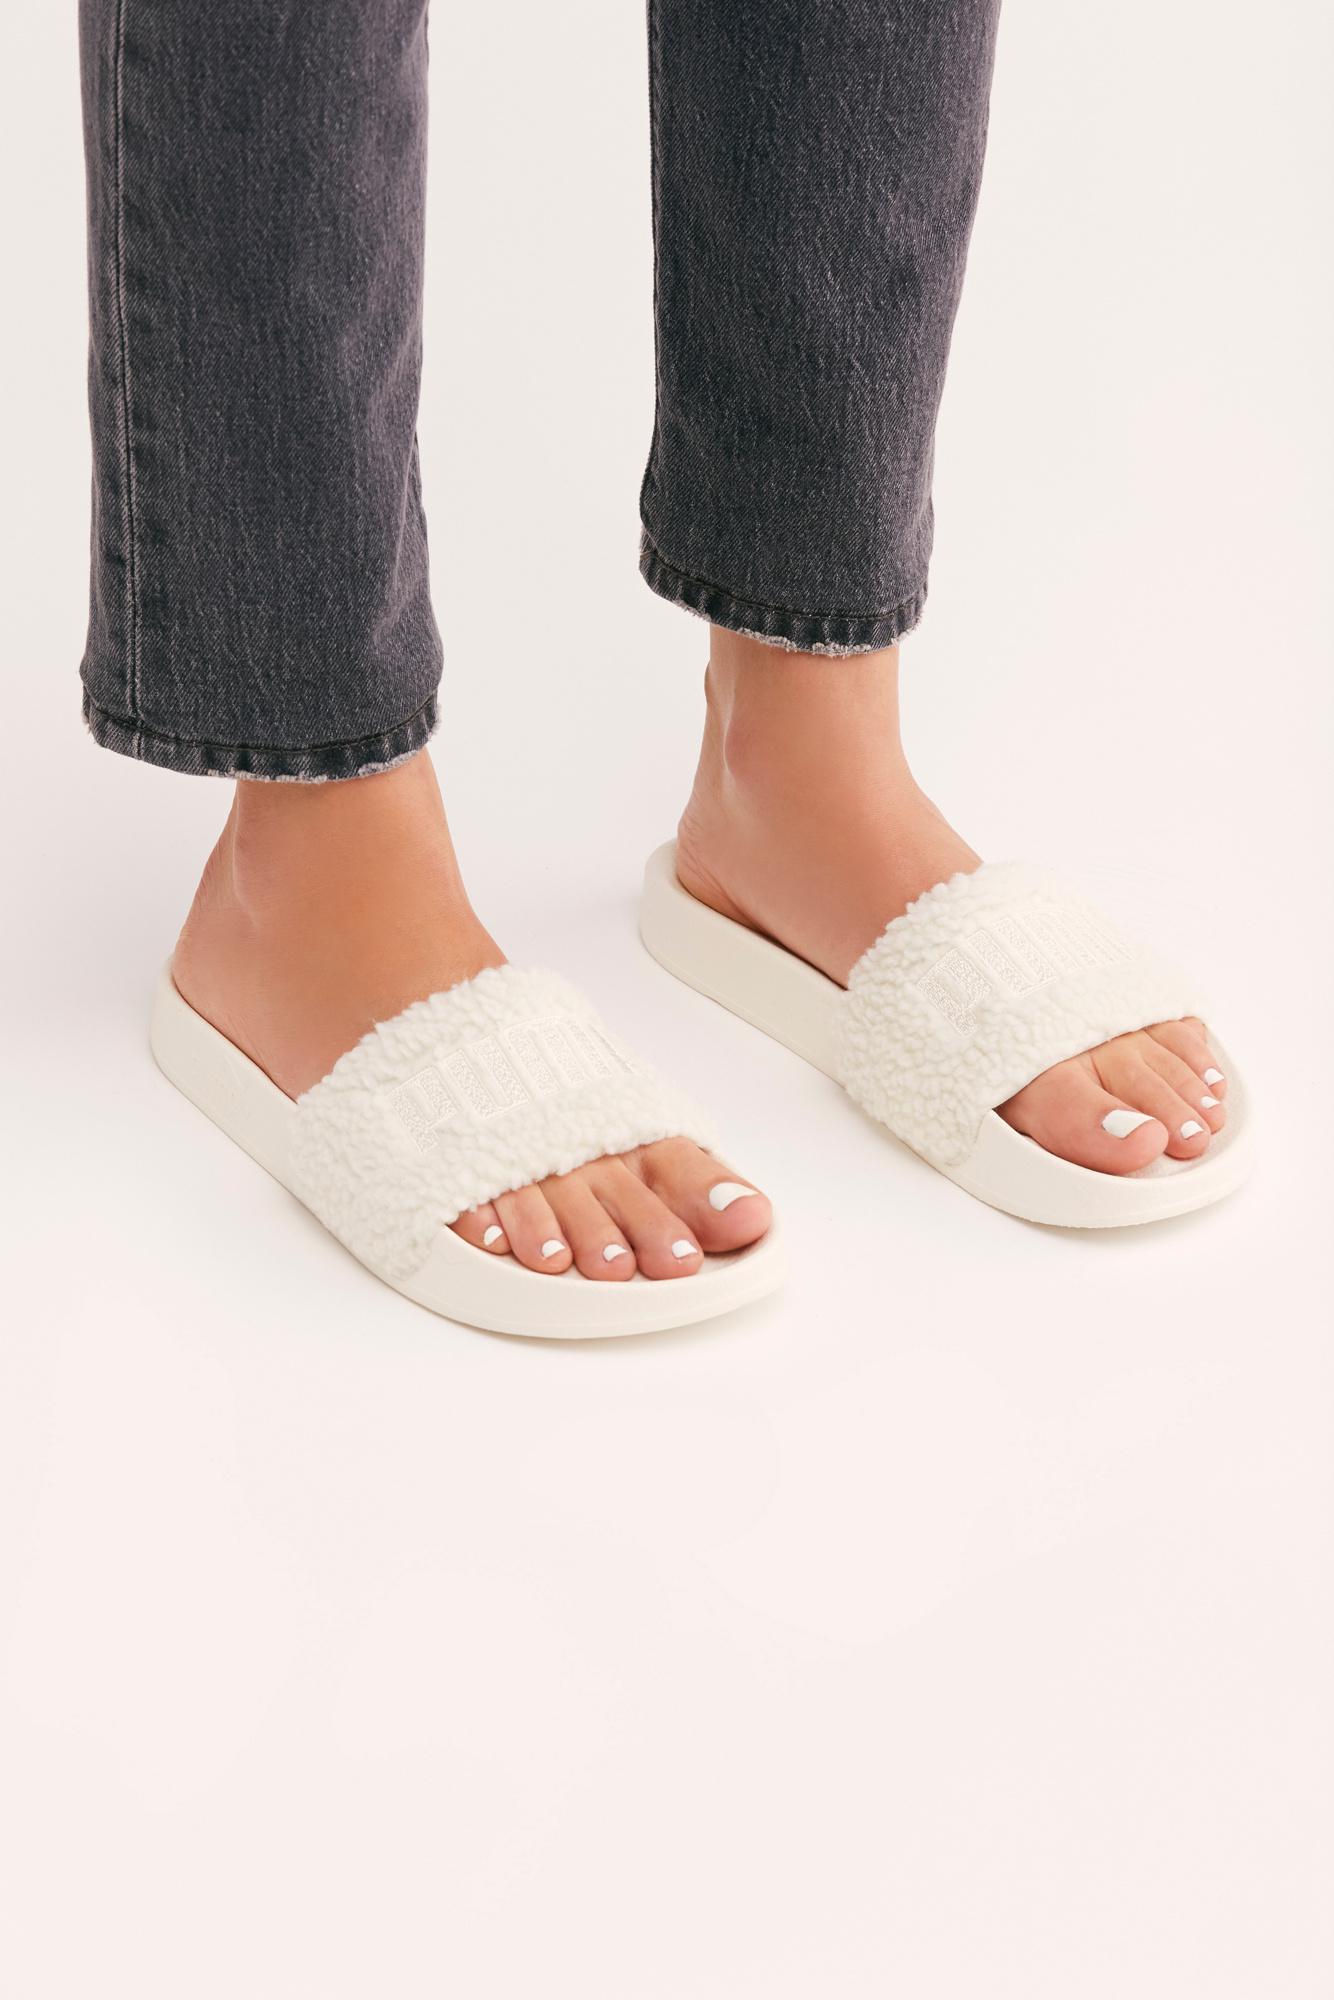 Free People Satin Leadcat Sherpa Slide By Puma in White - Lyst